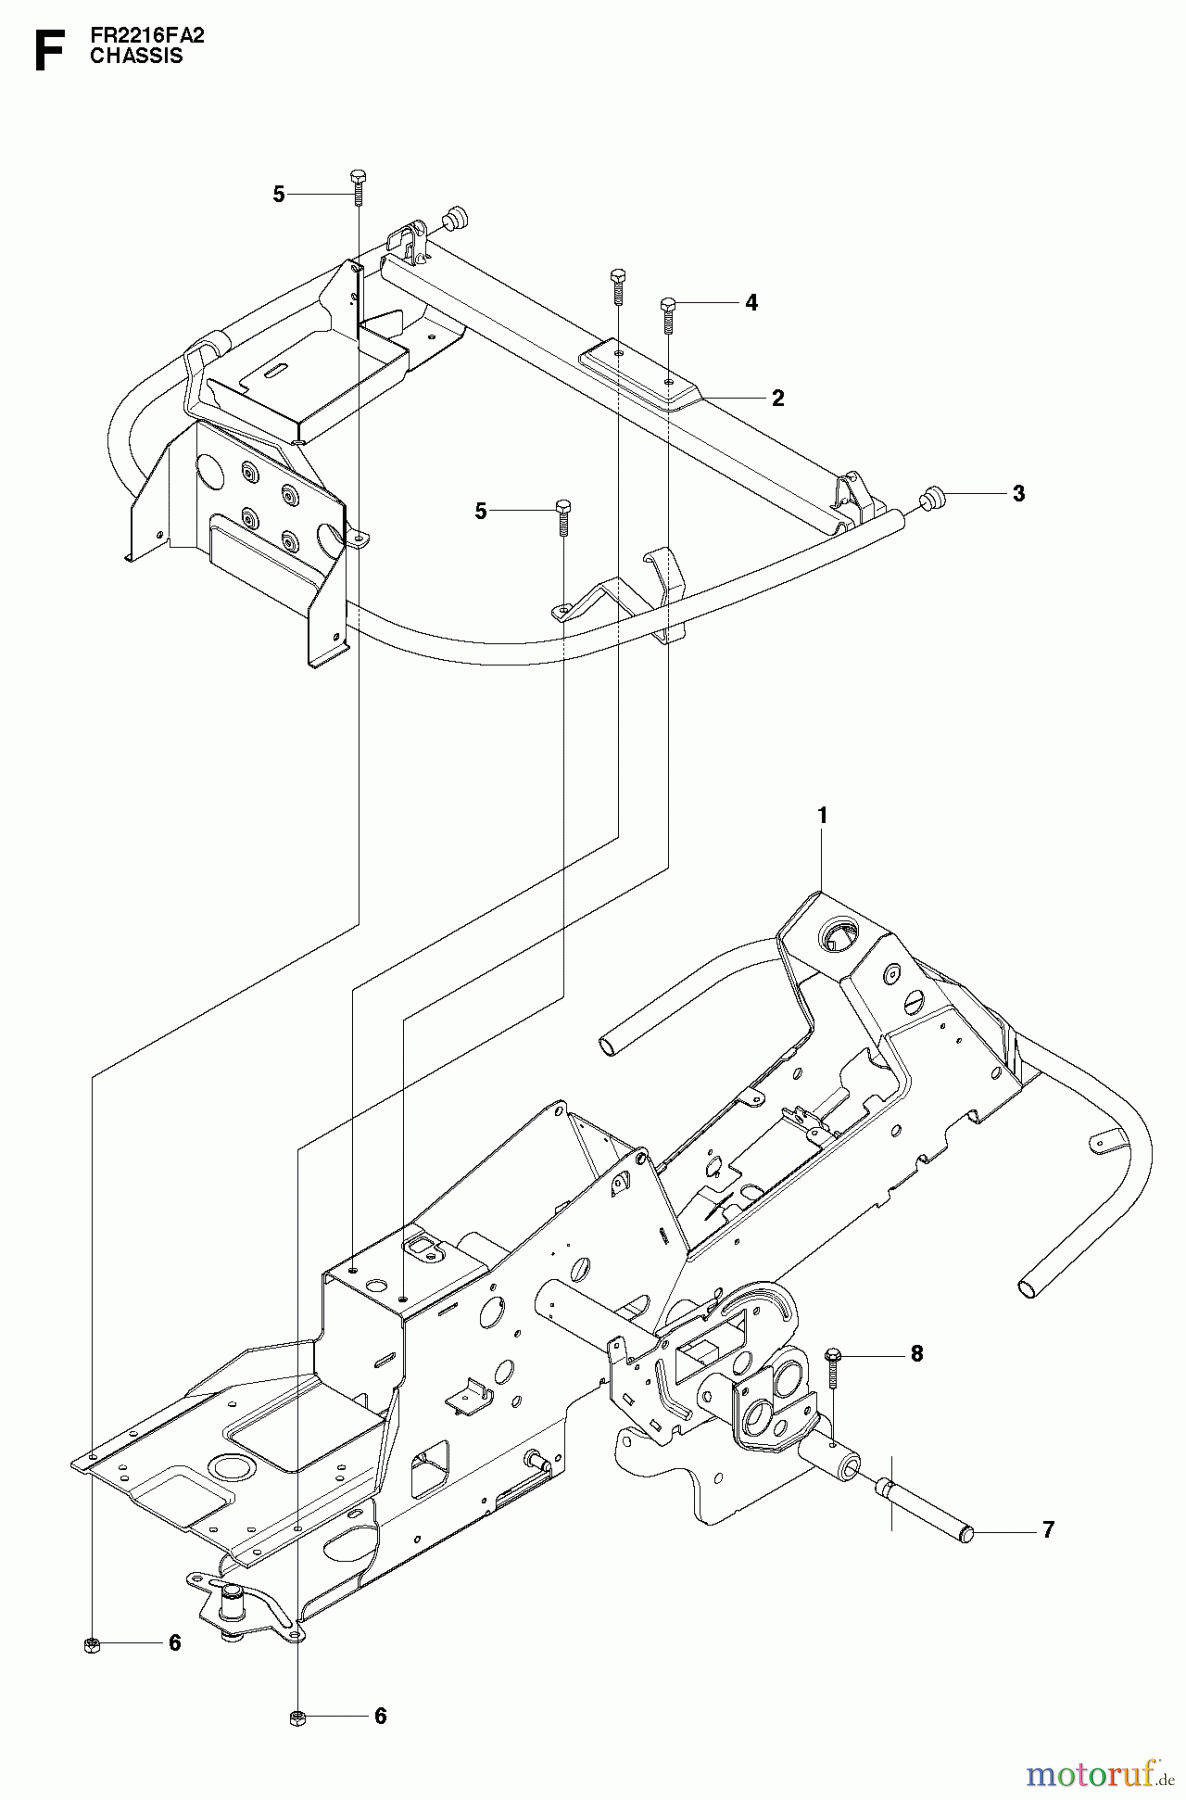  Jonsered Reitermäher FR2216 FA2 (966415101) - Jonsered Rear-Engine Riding Mower (2010-07) CHASSIS ENCLOSURES